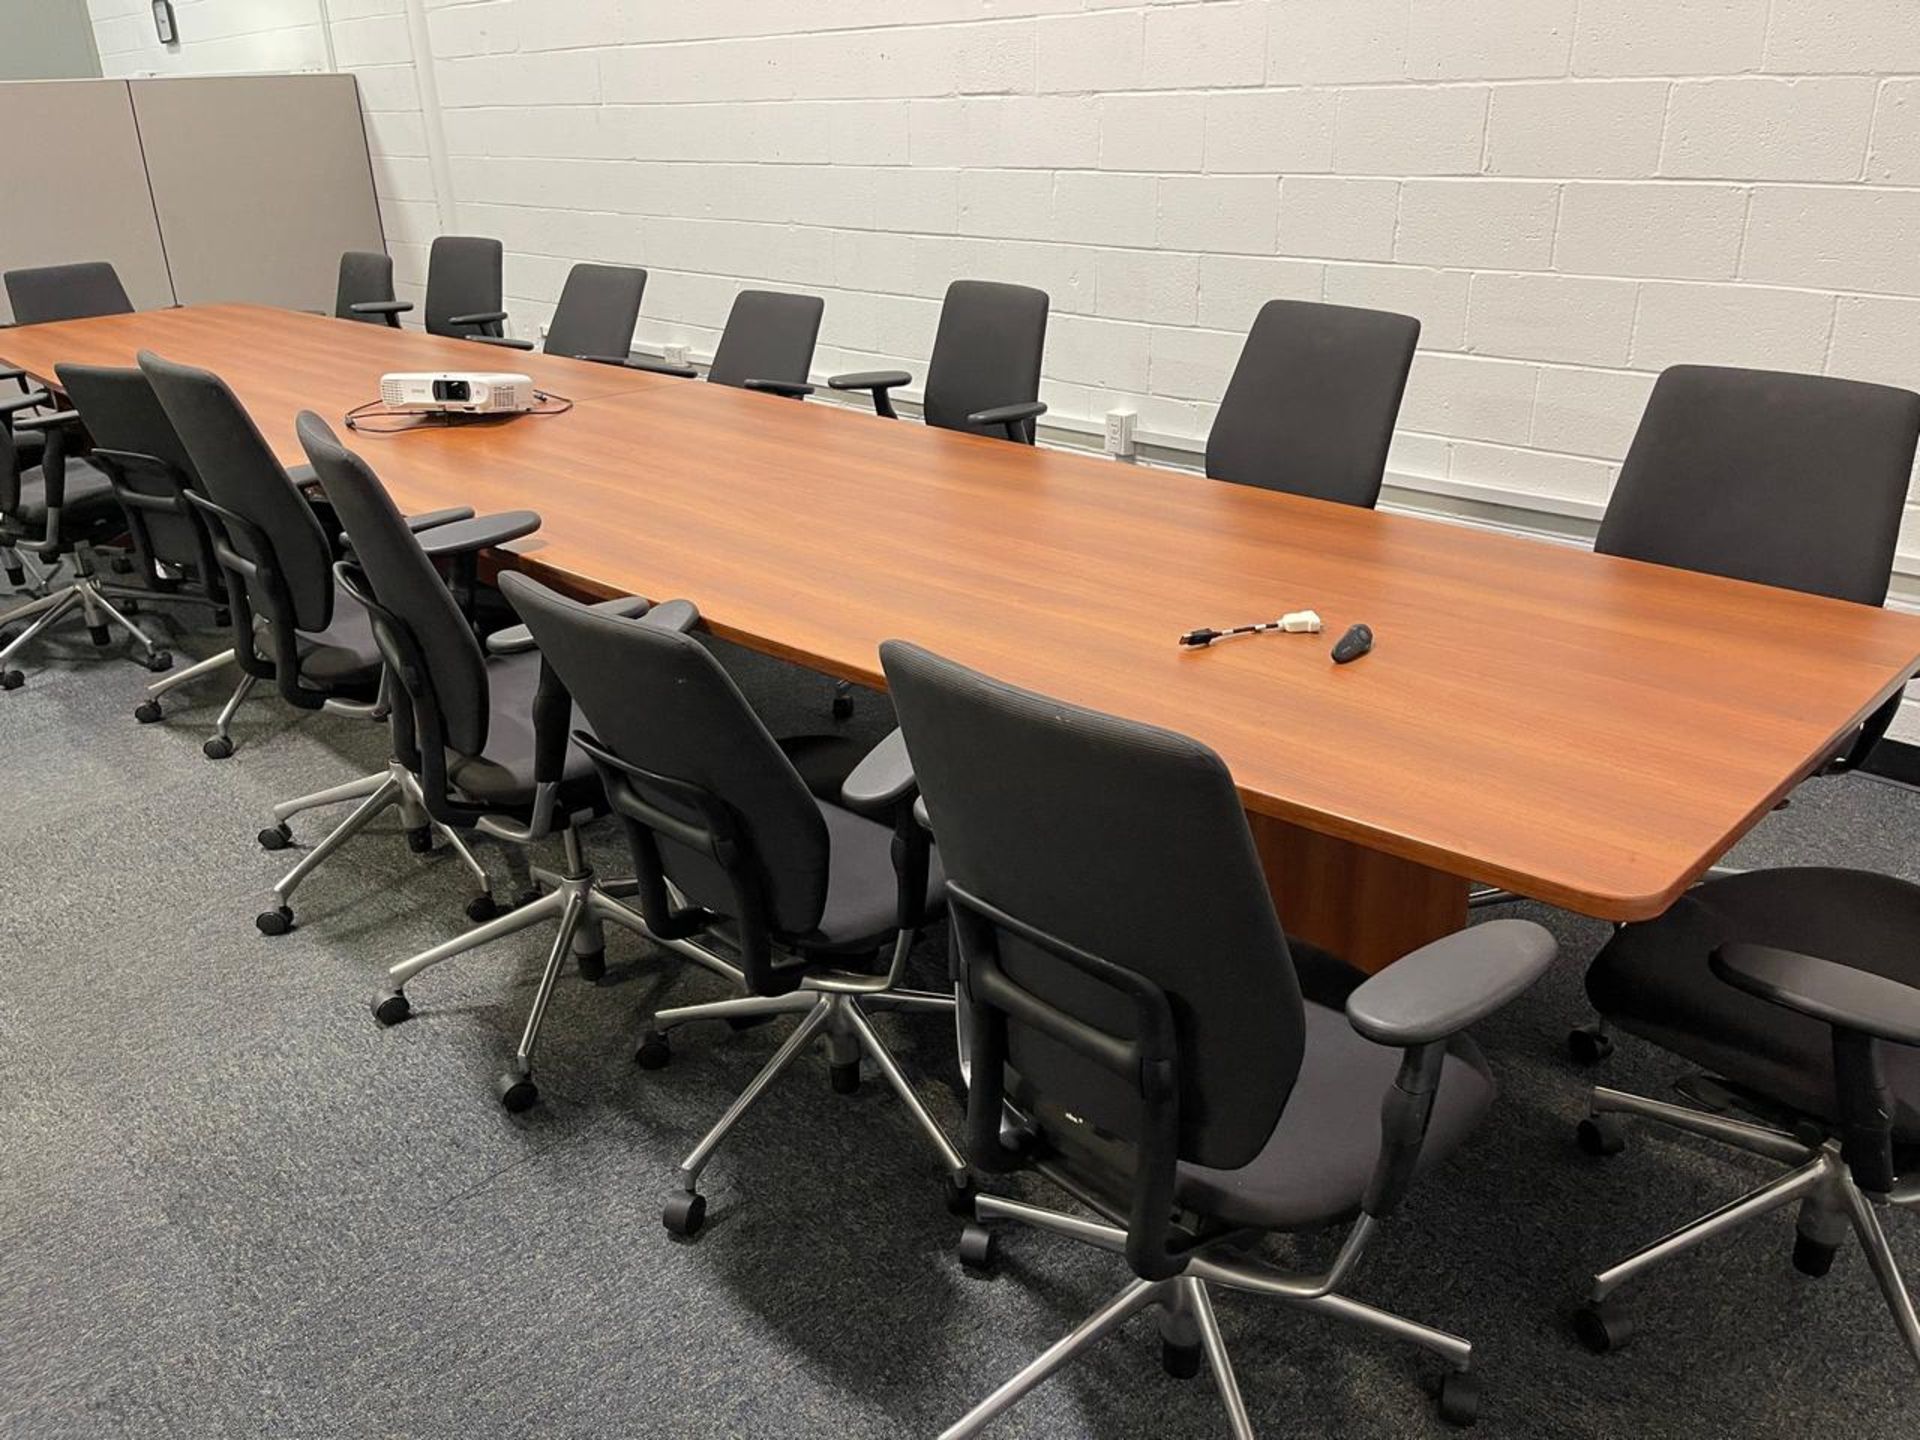 LARGE CONFERENCE TABLE WITH CHAIRS